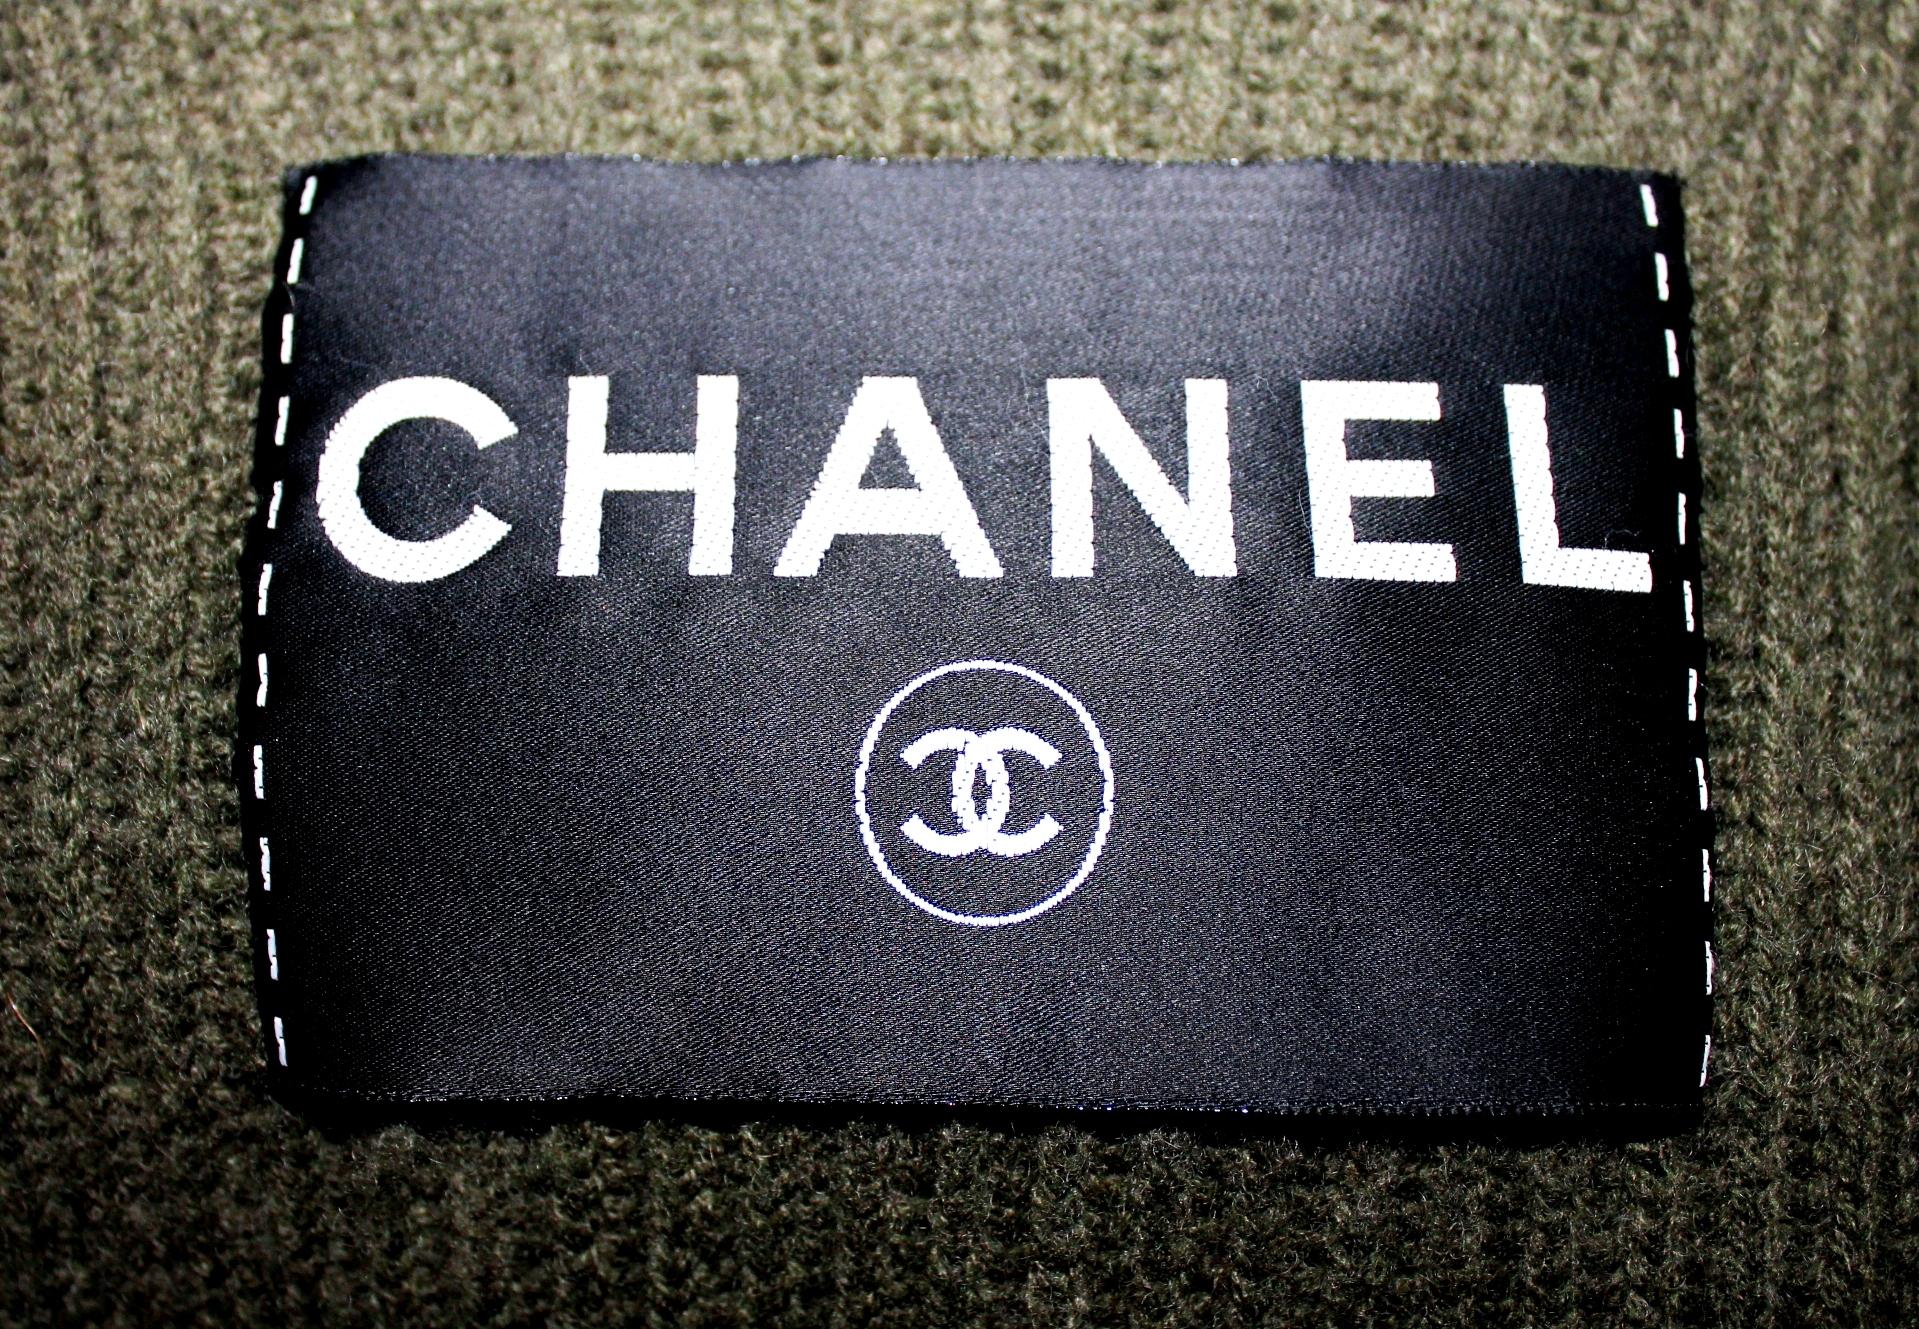 Stunning Chanel Dress
Finest pure olive cashmere wool
With huge Chanel logo tag in front
A CHANEL siganture piece created 
Featured in the CHANEL AD campaign, editorials
A similar version of this dress in navy was seen on Pamela Anderson
A very